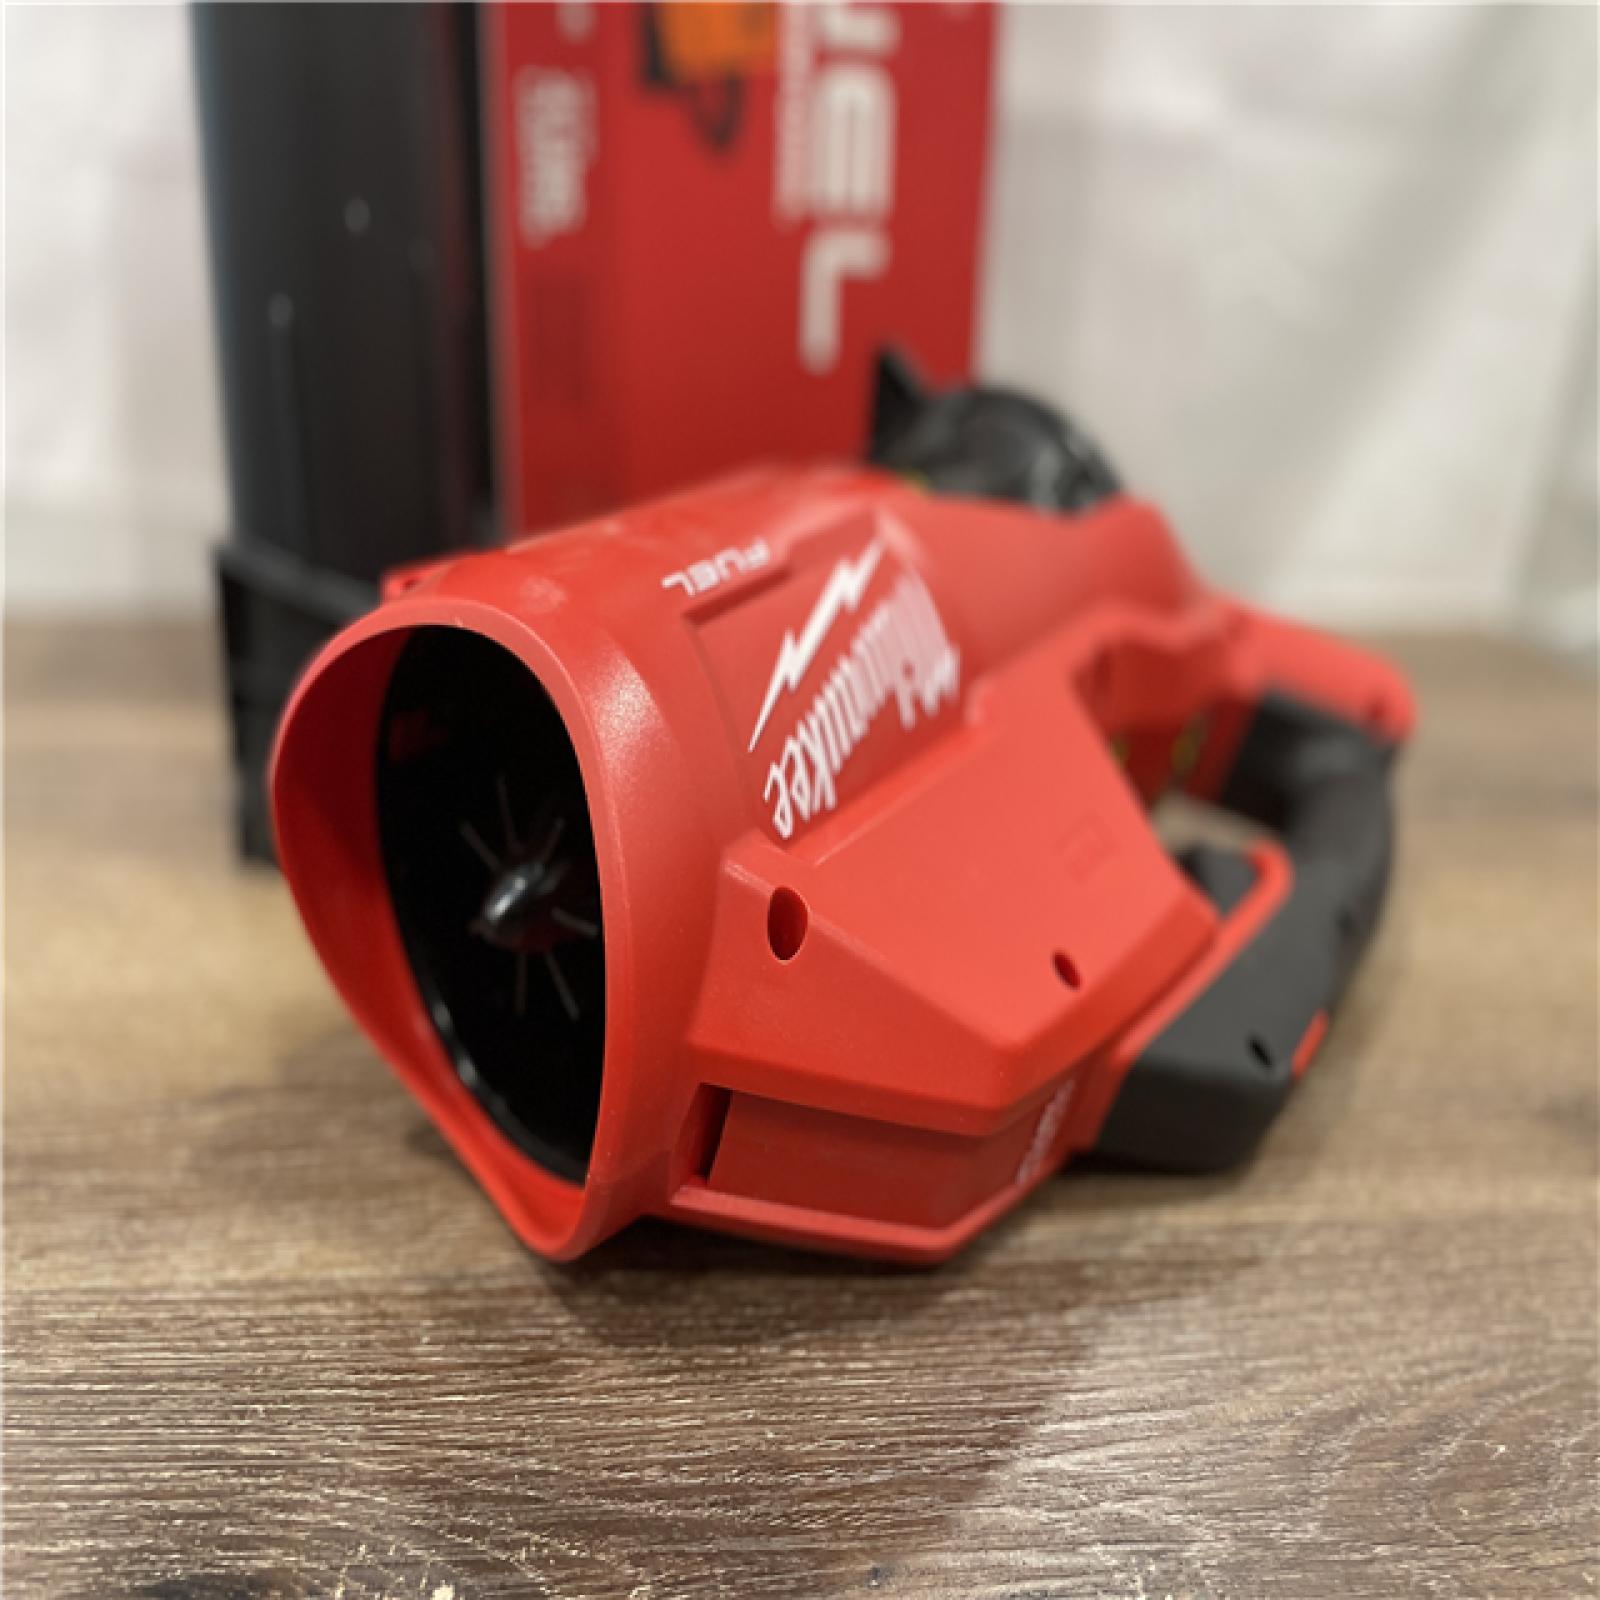 AS-IS Milwaukee Cordless Handheld Blower (Tool-Only)